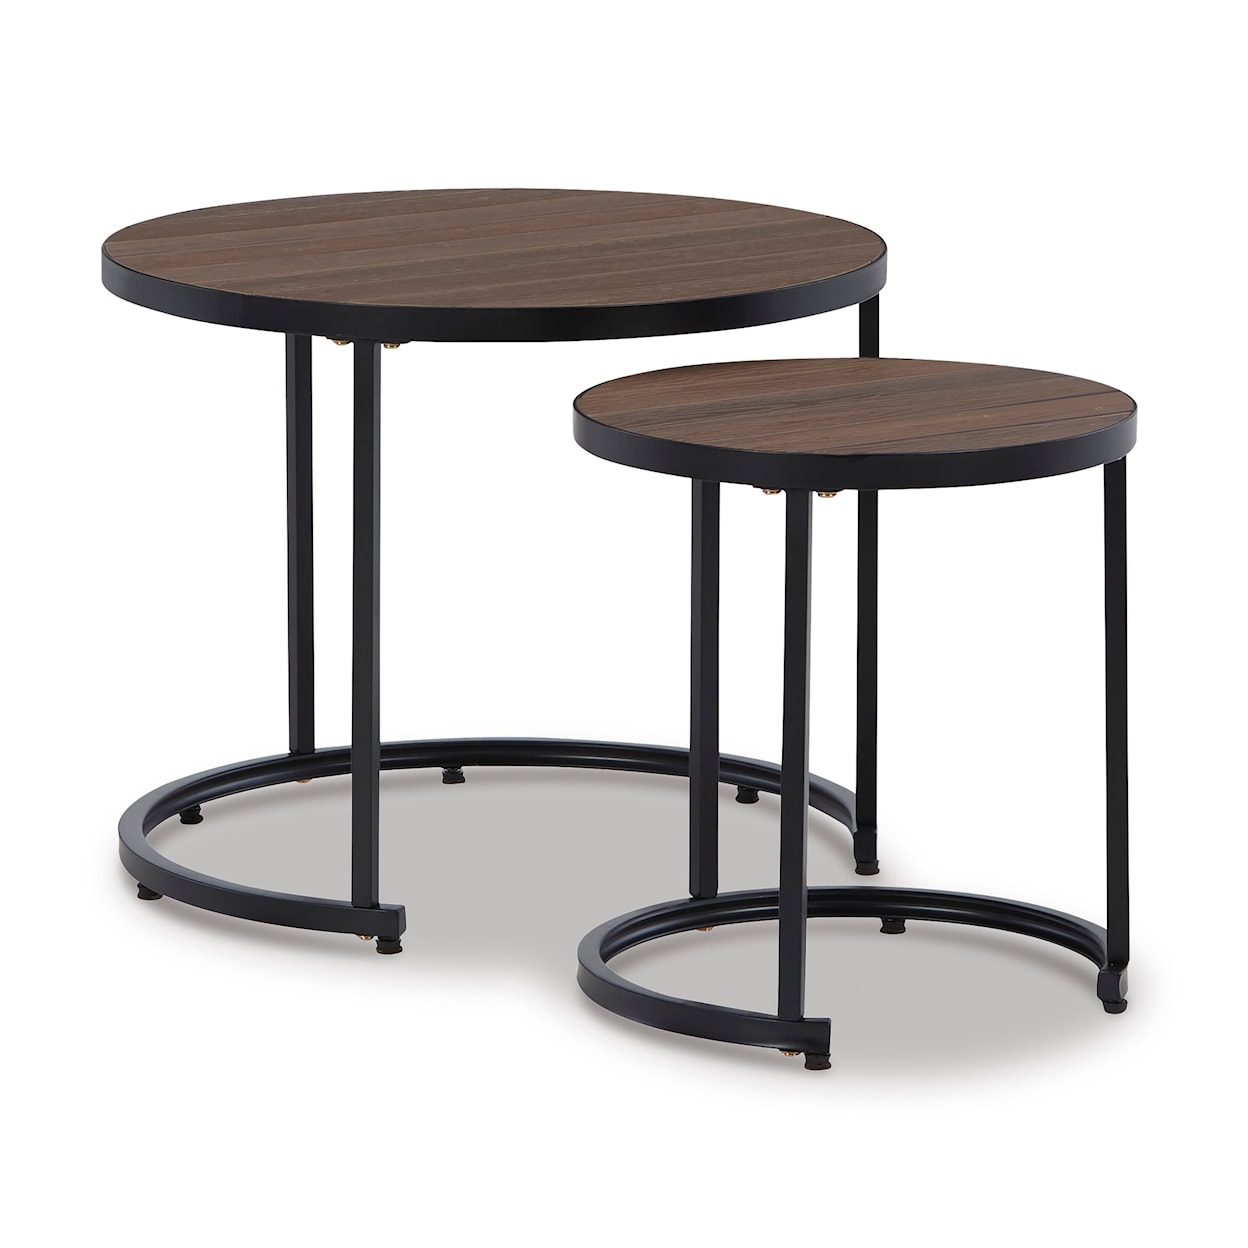 Benchcraft Ayla Outdoor Nesting End Tables (Set of 2)